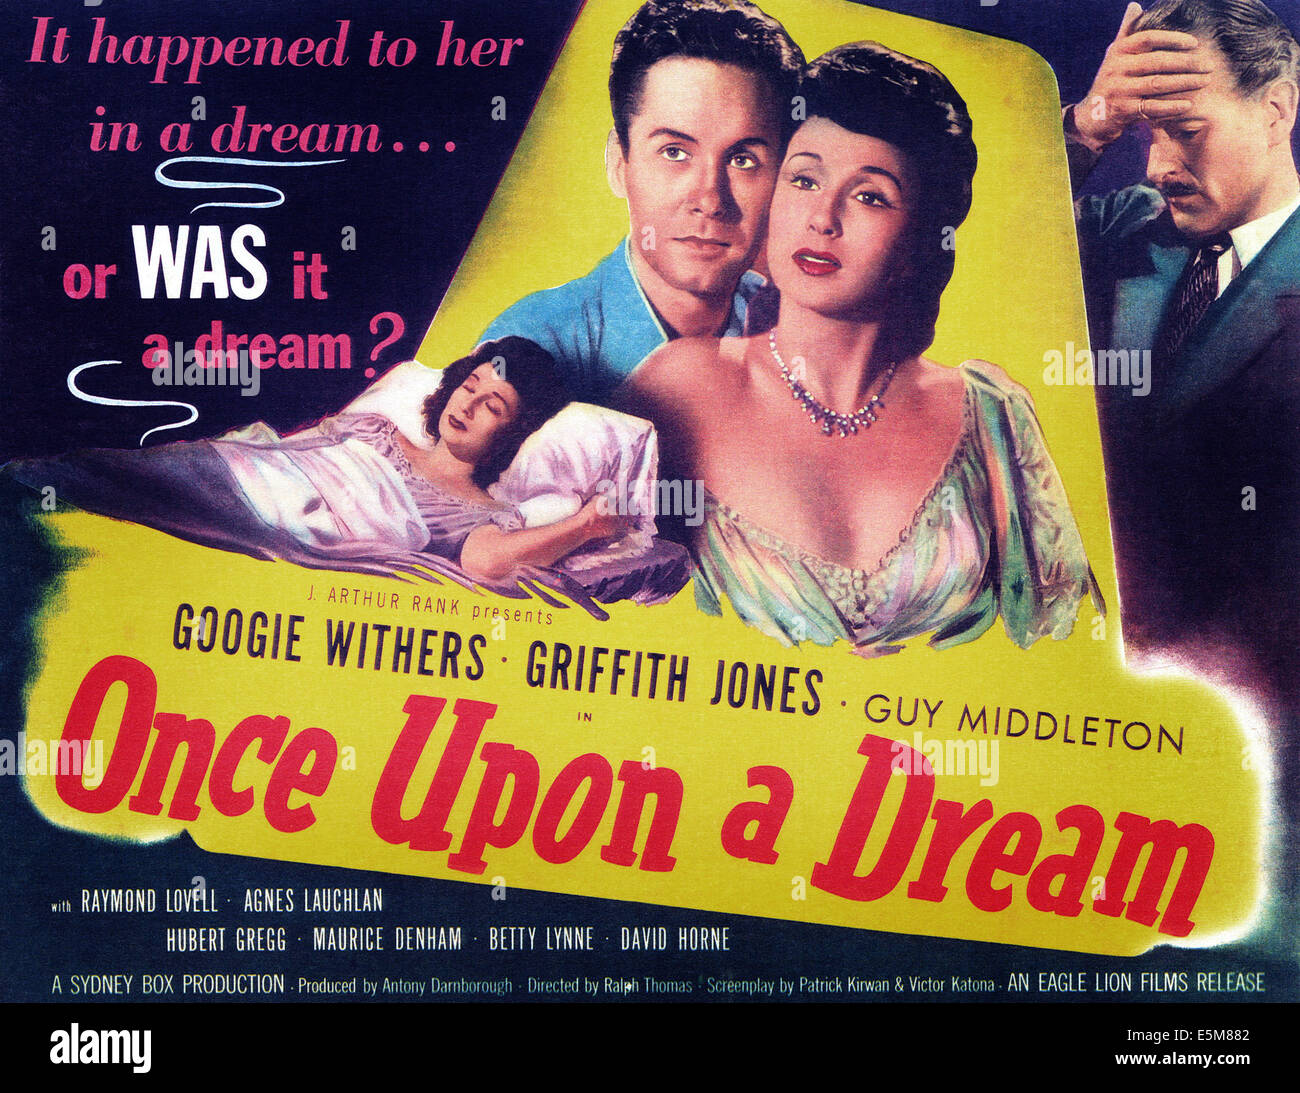 EINMAL auf A DREAM, von links: Googie withers, Griffith Jones, Googie Withers, Guy Middleton, 1949 Stockfoto